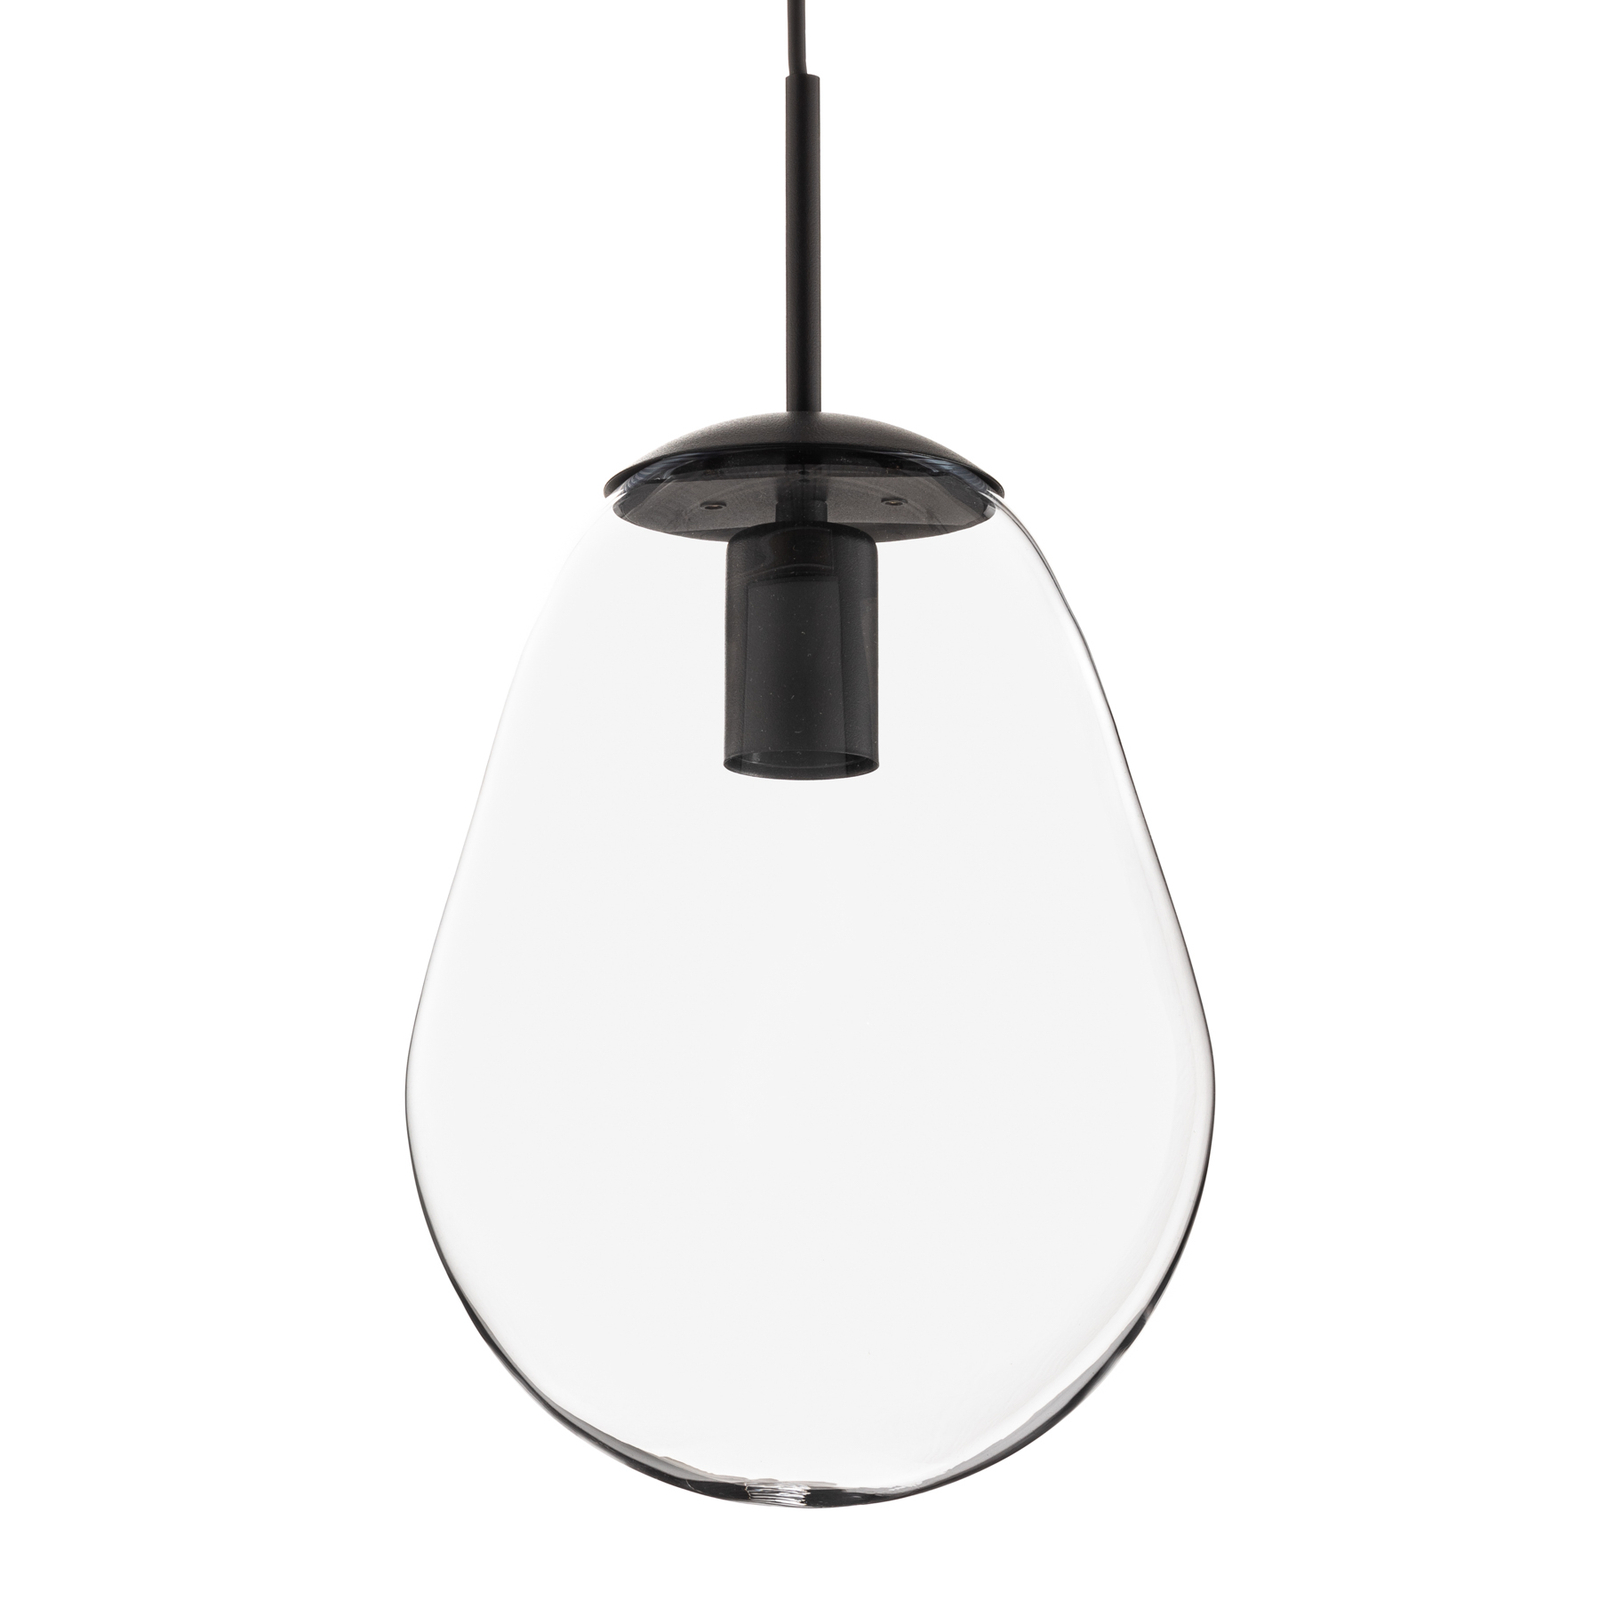 Pear S pendant light with glass shade, black